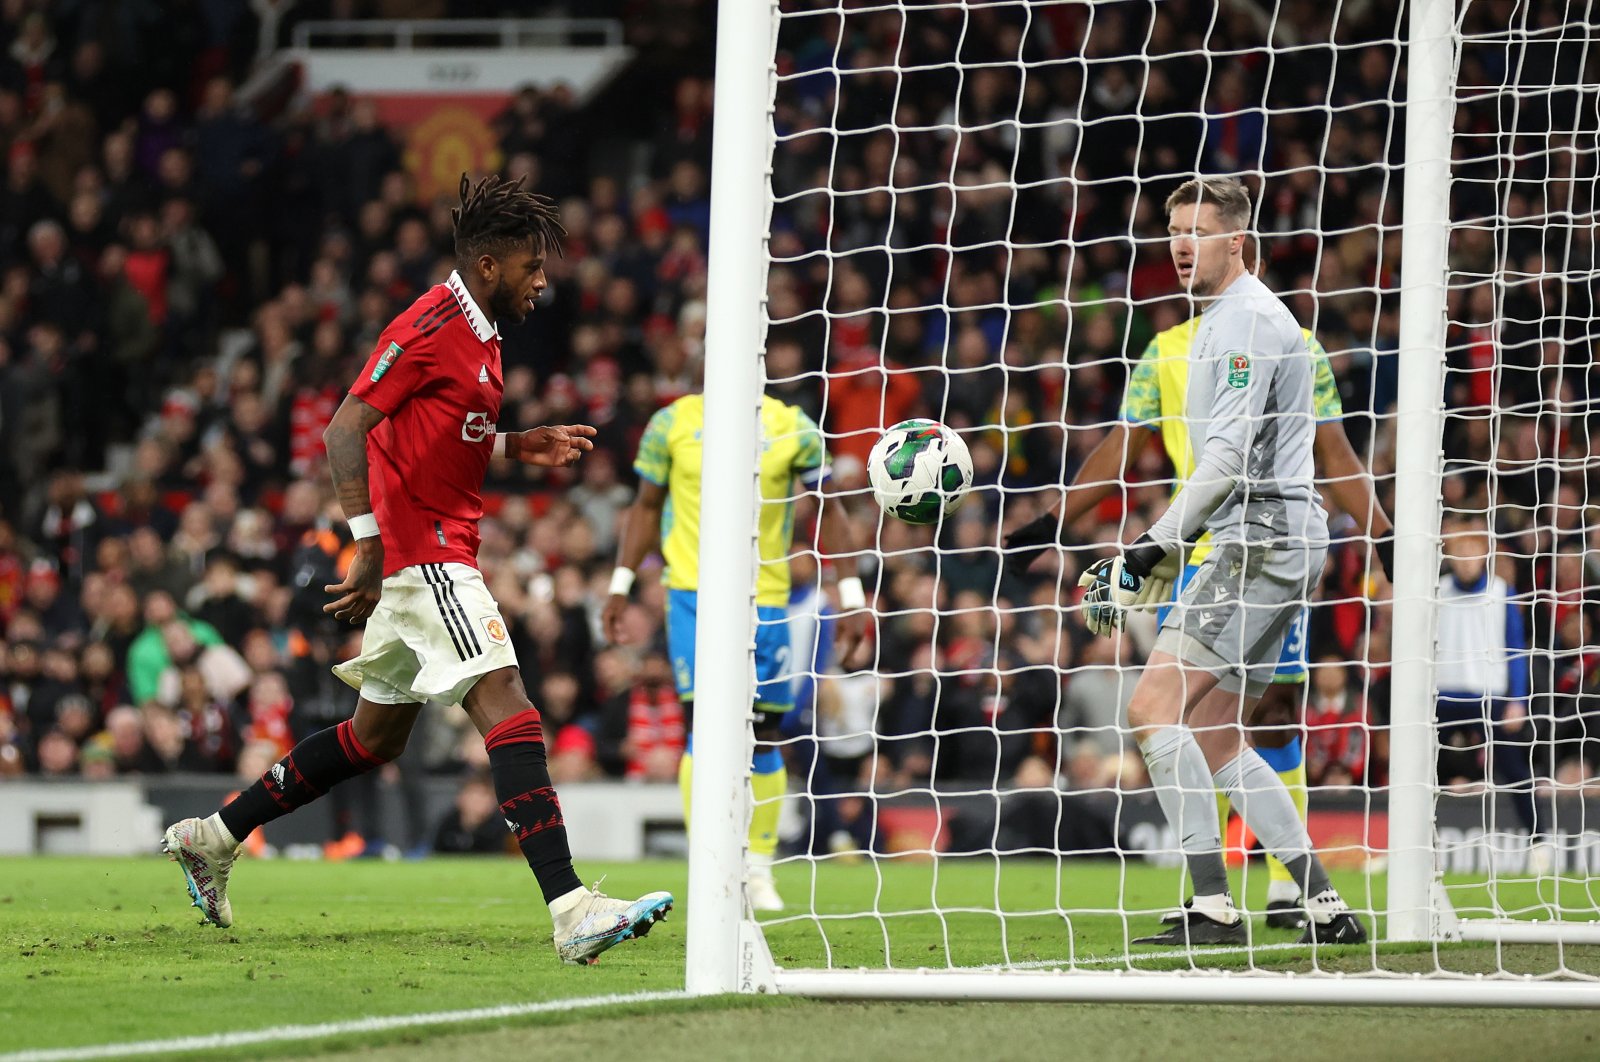 Manchester United&#039;s Fred scores the team&#039;s second goal during the Carabao Cup semifinal 2nd Leg match against Nottingham Forest at Old Trafford, Manchester, U.K., Feb. 1, 2023. (Getty Images Photo)